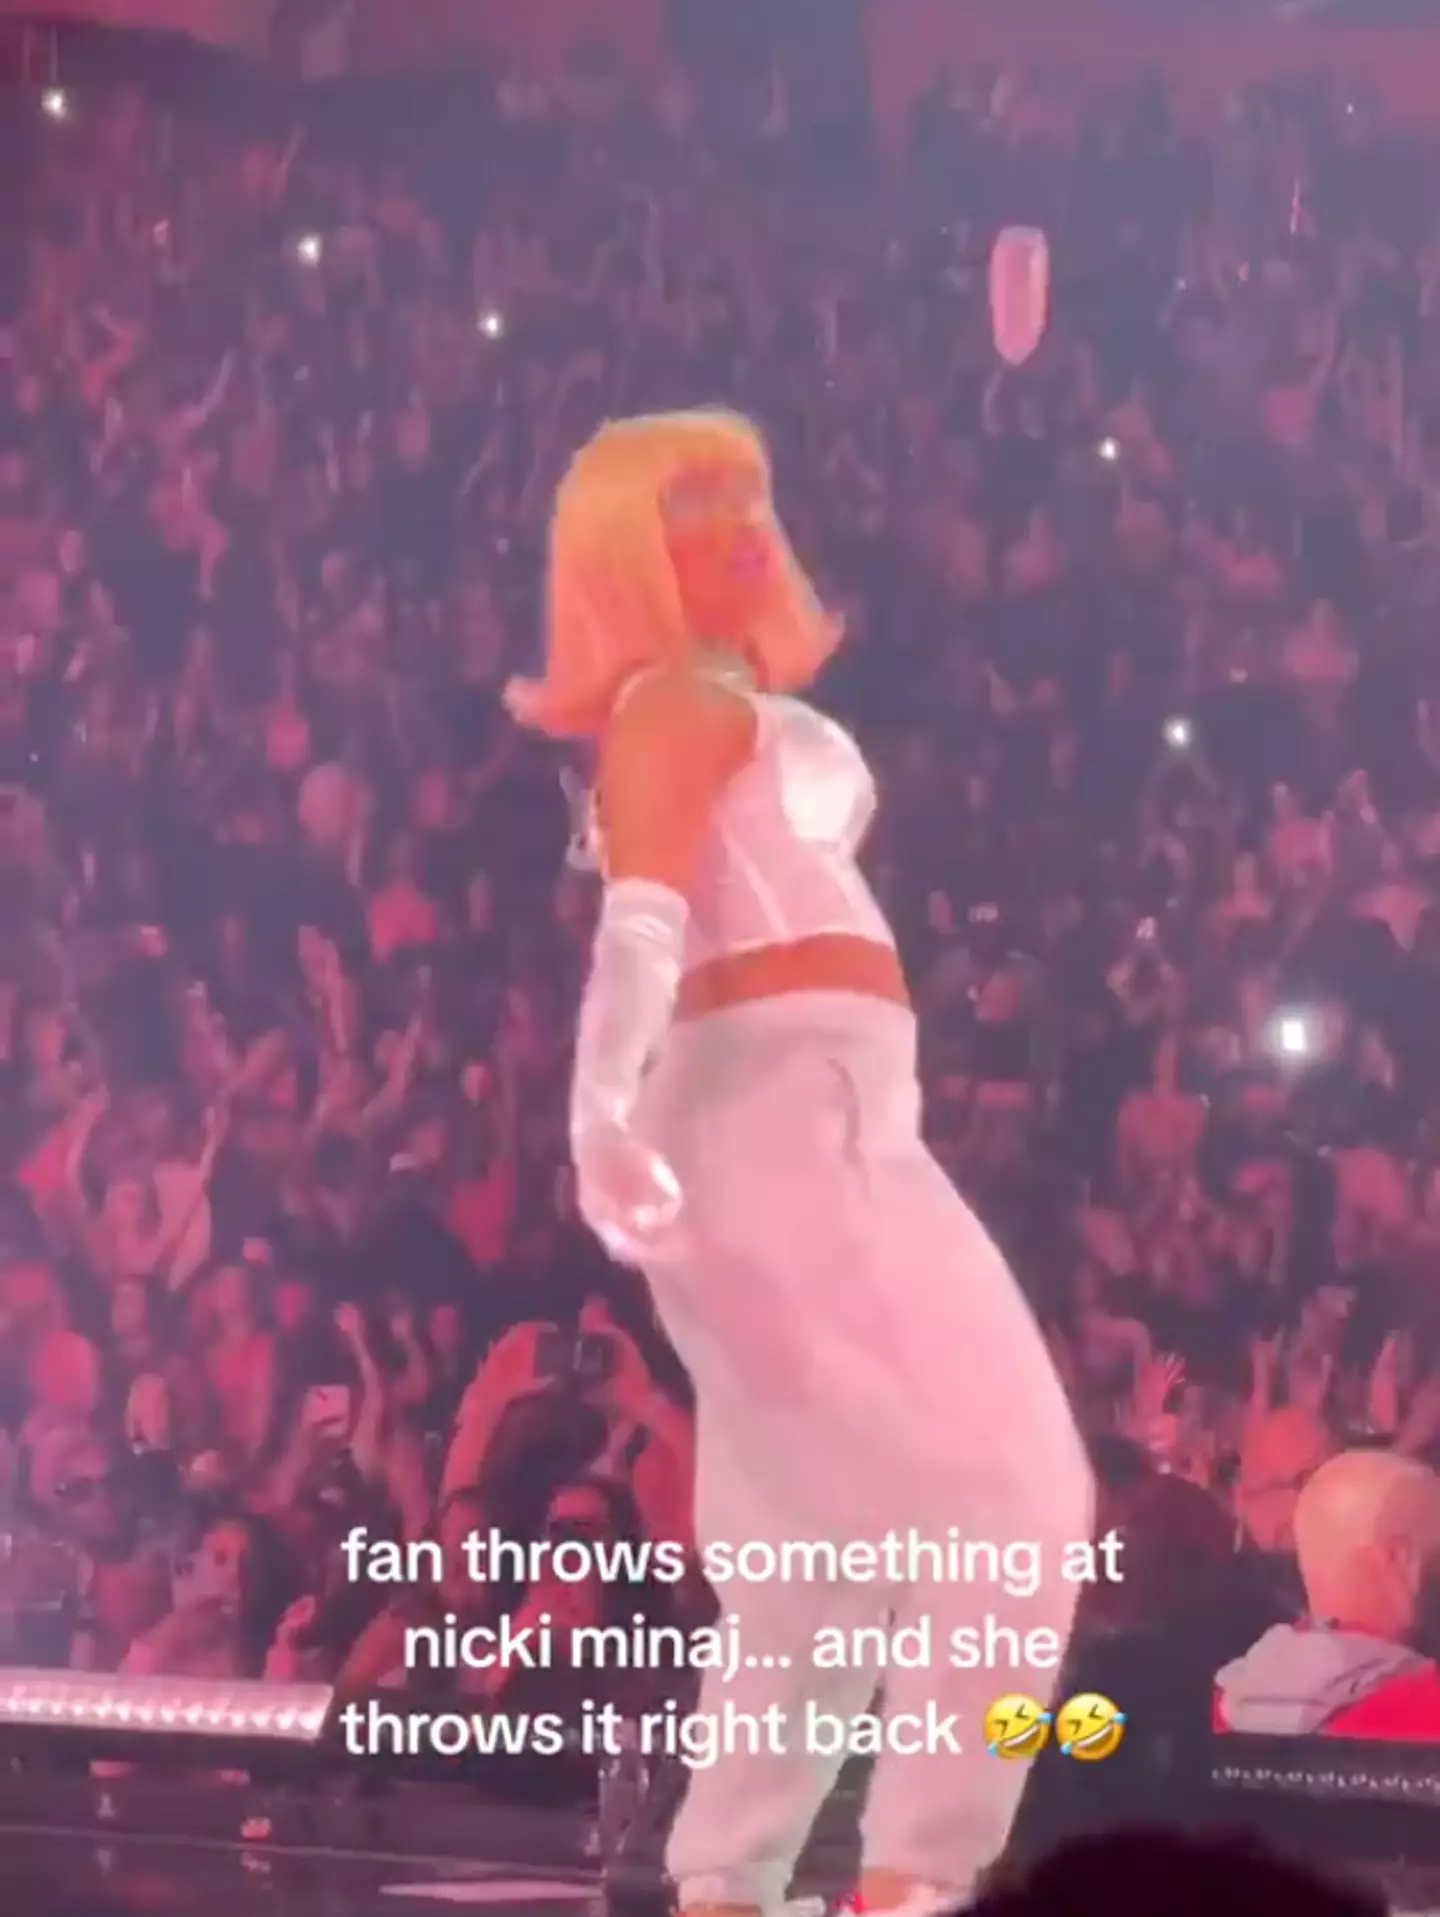 Social media users were left stunned by the whole incident and defended Minaj for her reaction. (TikTok/@itsneshaaa)